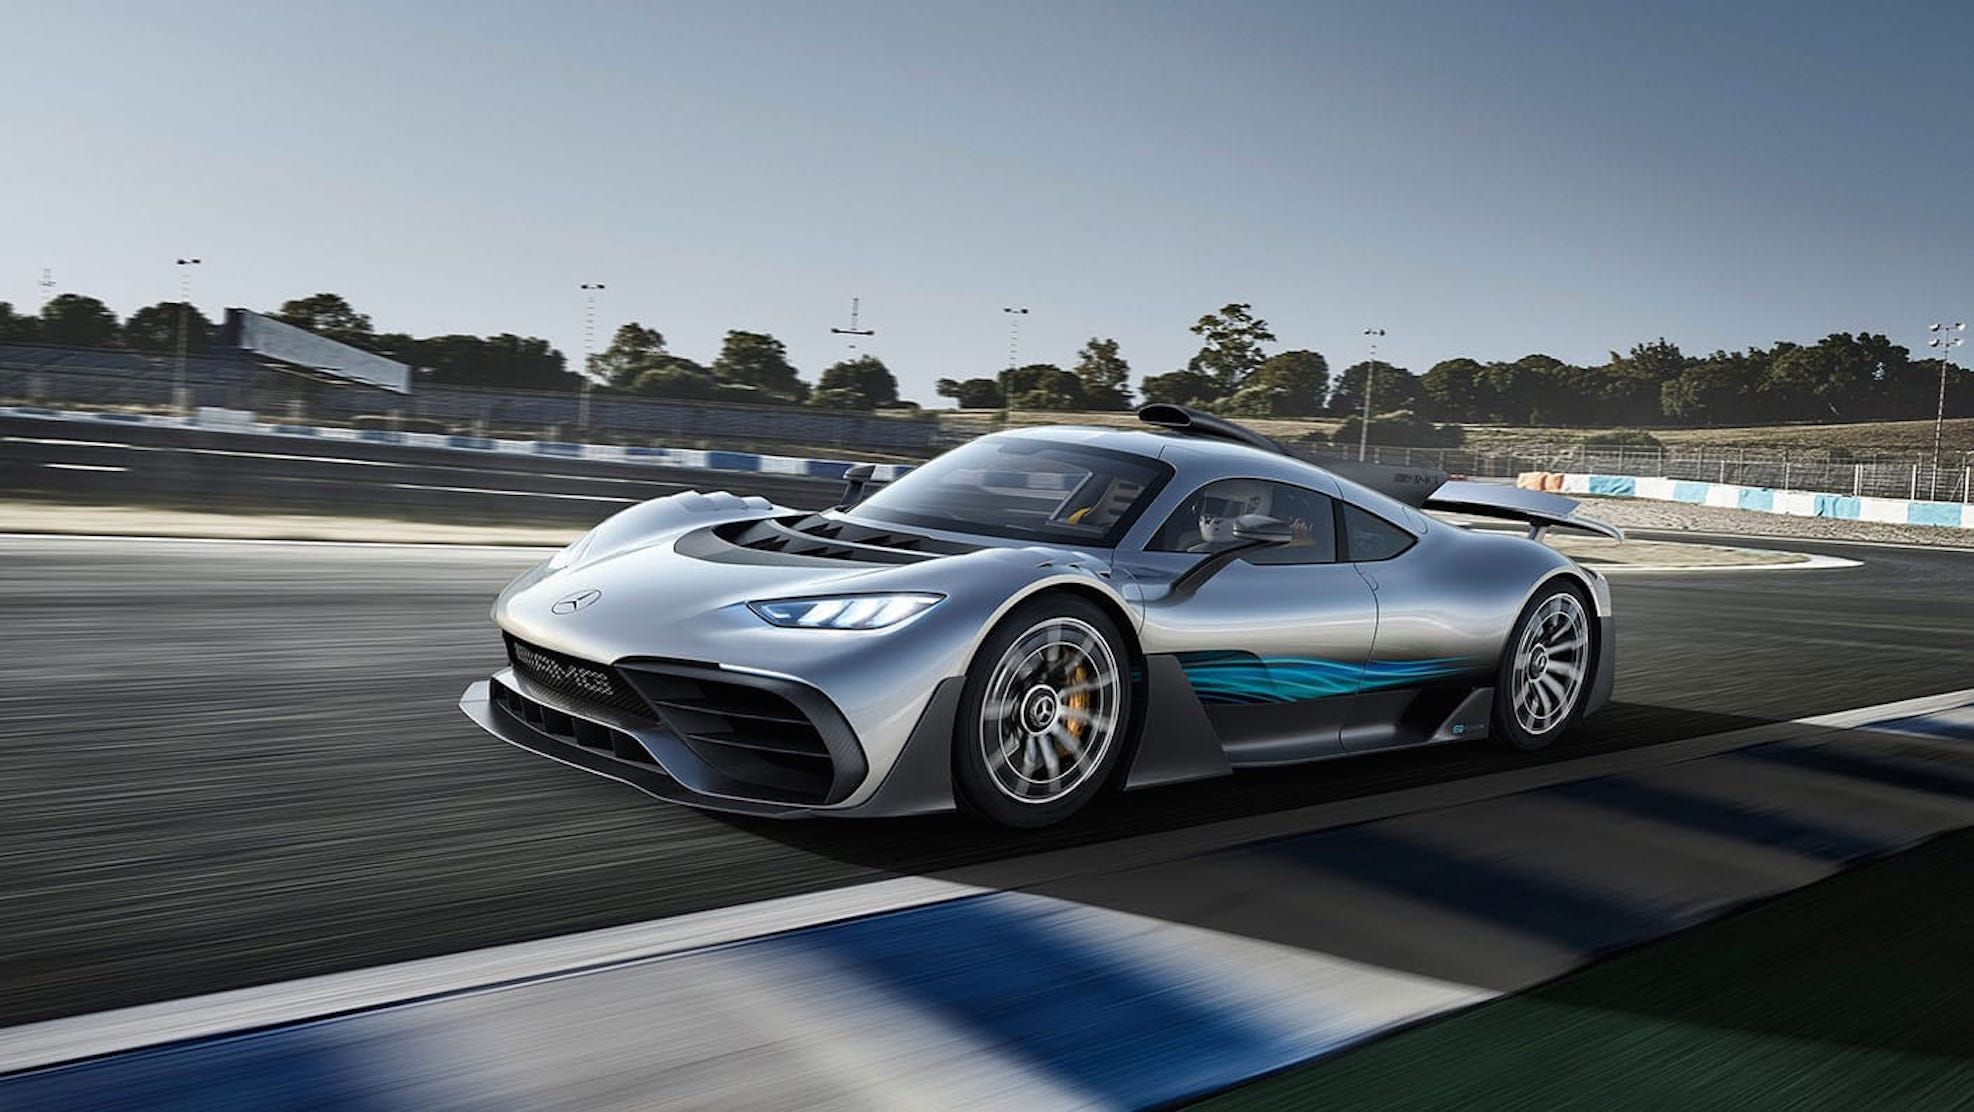 Mercedes AMG Project One at Race Track